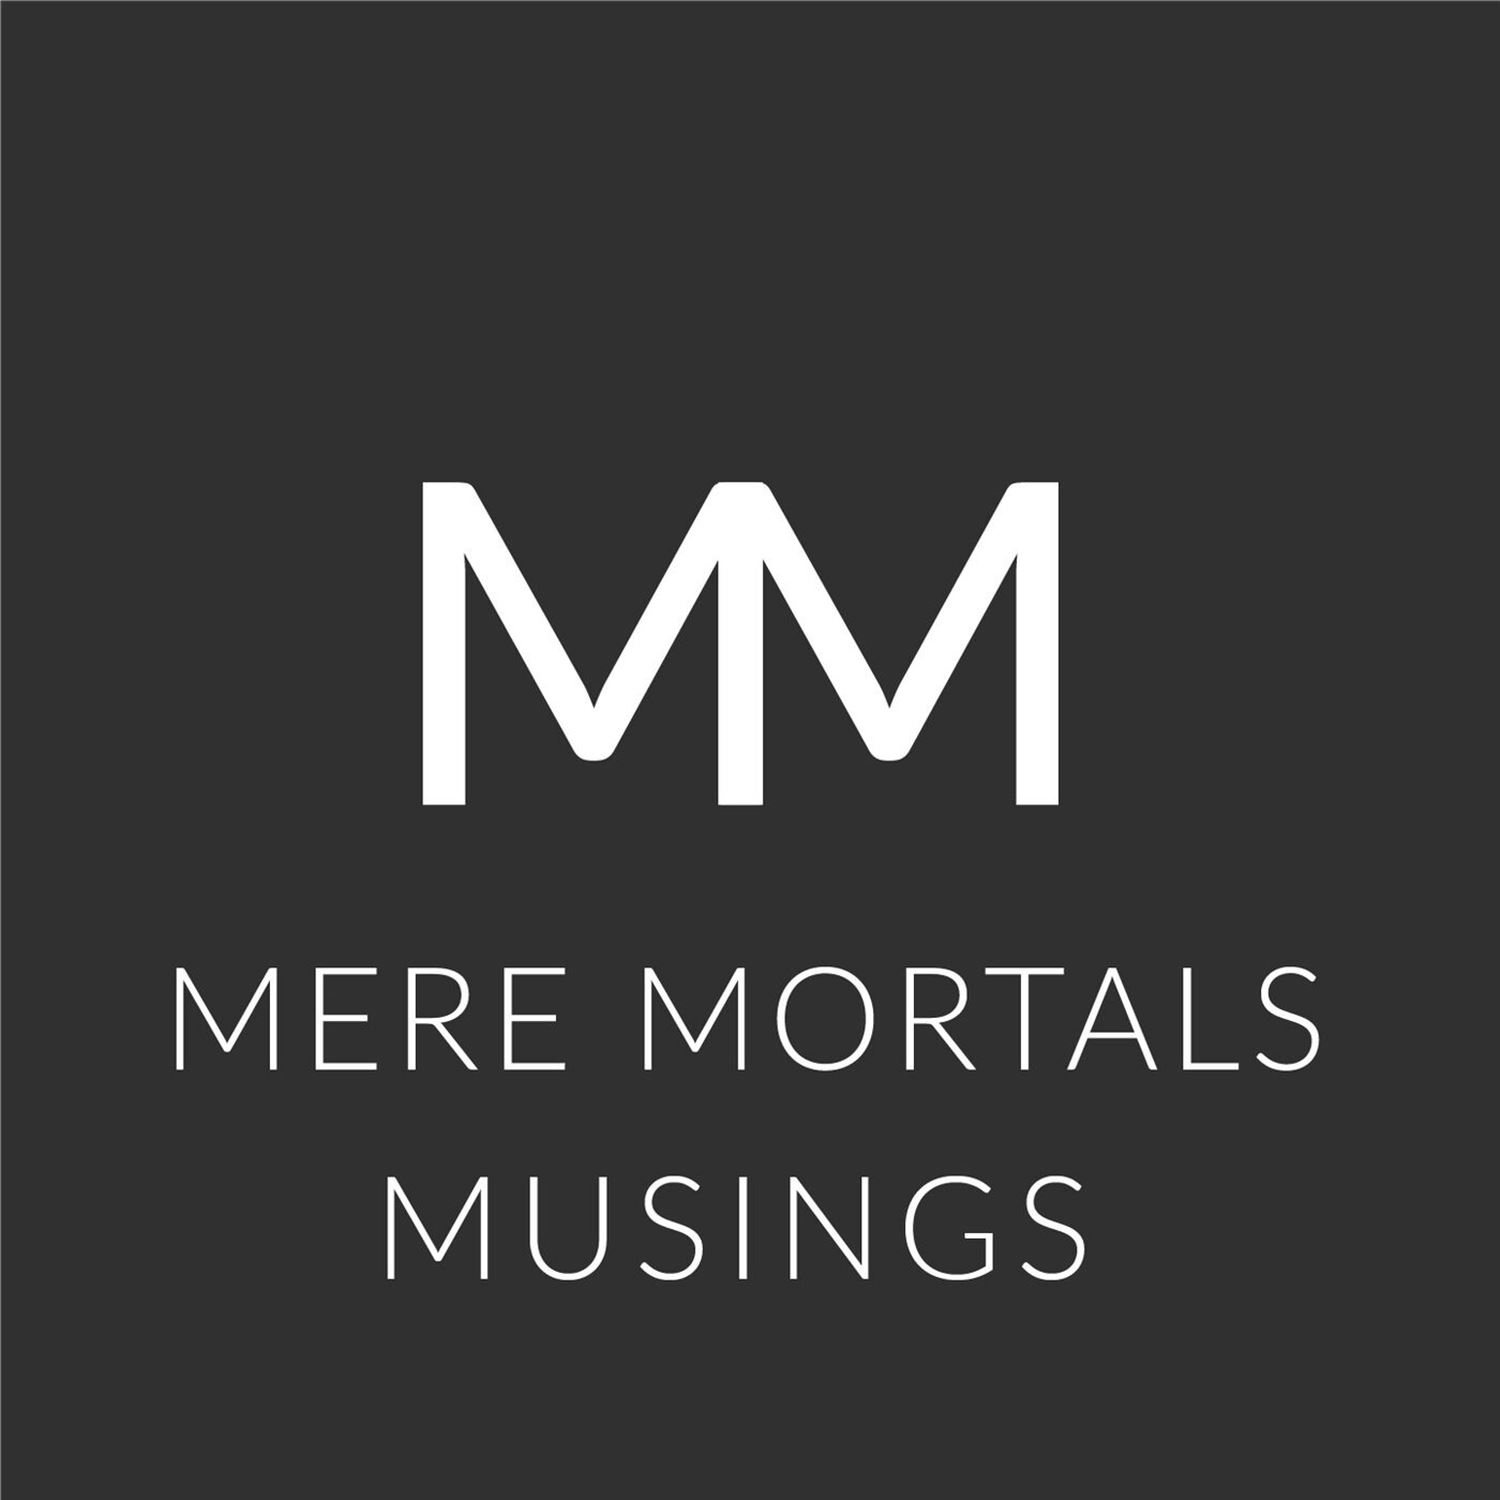 Pivot On My Problematic Grave (Mere Mortals Episode #72 - Musings)